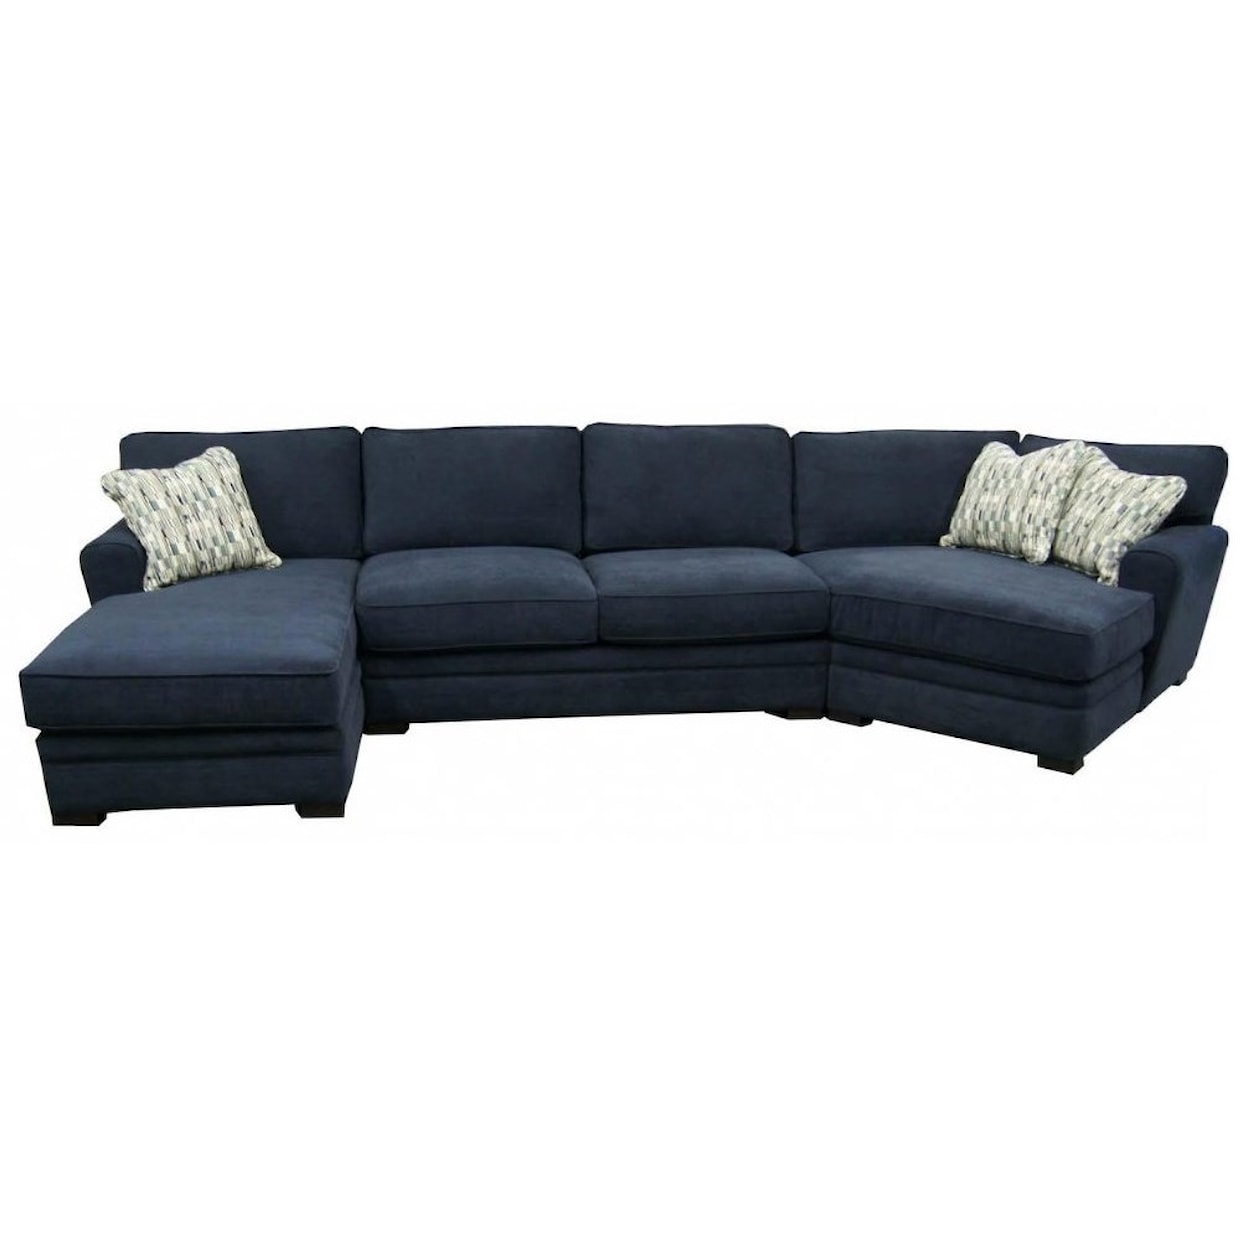 Jonathan Louis Choices - Aries 3-Piece Chaise Cuddler Sectional